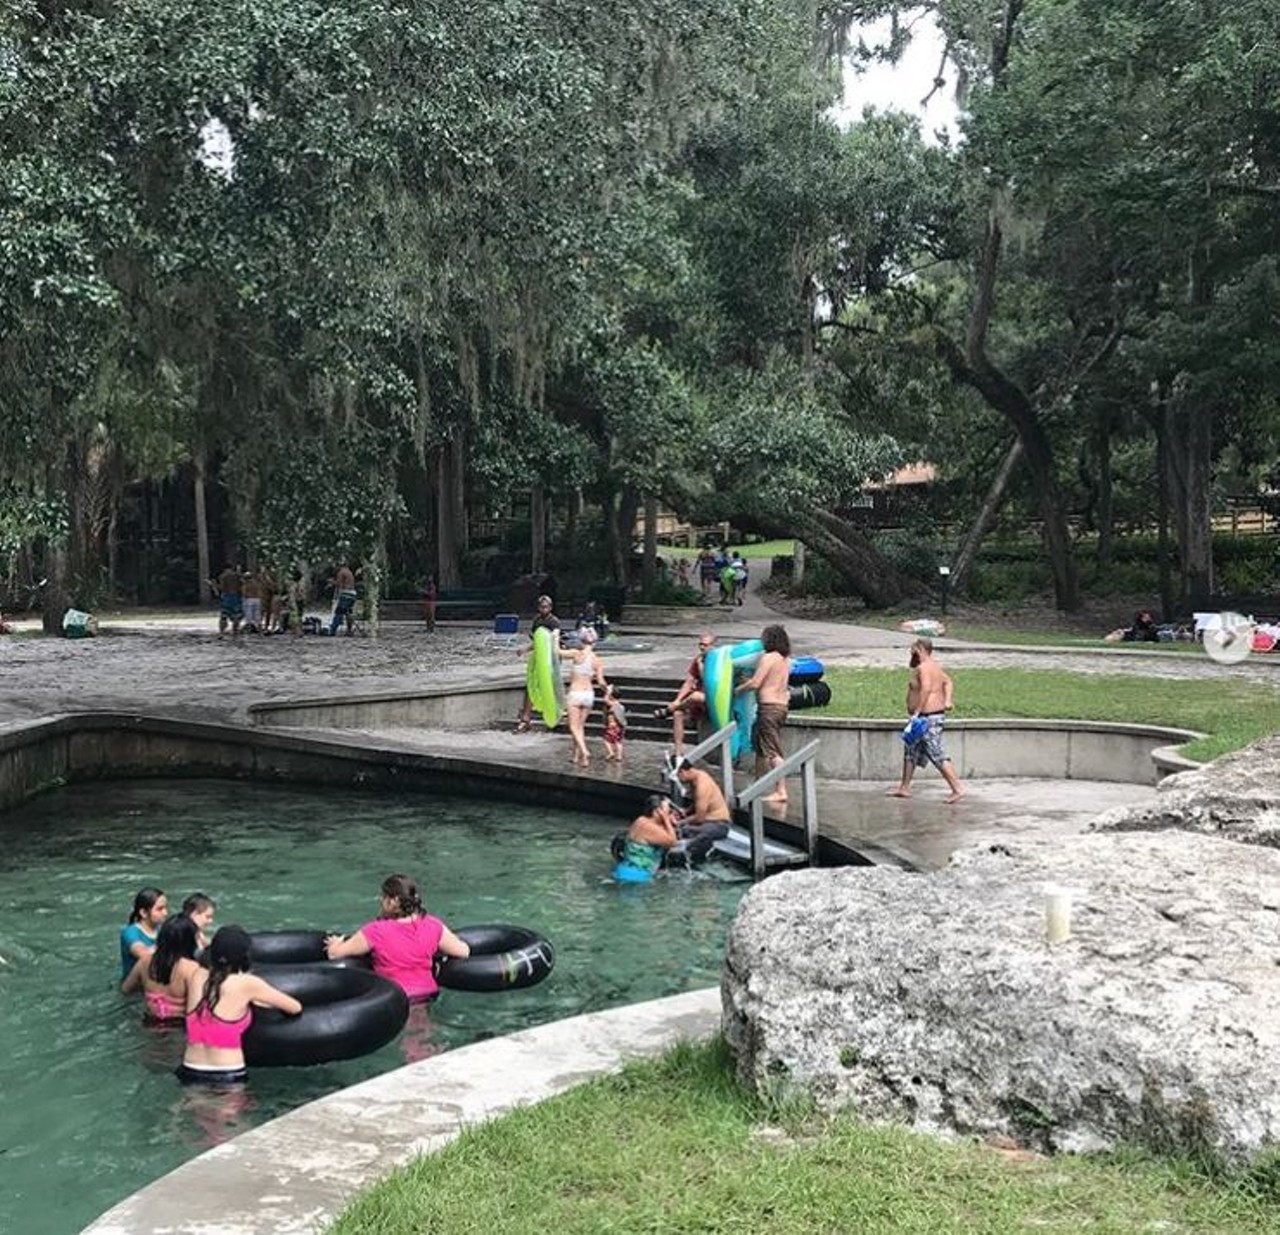 Rock Springs Run at Kelly Park
Estimated driving distance: 40 minutes
Northwest of Orlando, this bubbly Apopka spring features a nice lazy river run. Rent a tube and never look back.
400 E. Kelly Park Road, Apopka
Photo via jonathan.t.marcia/Instagram